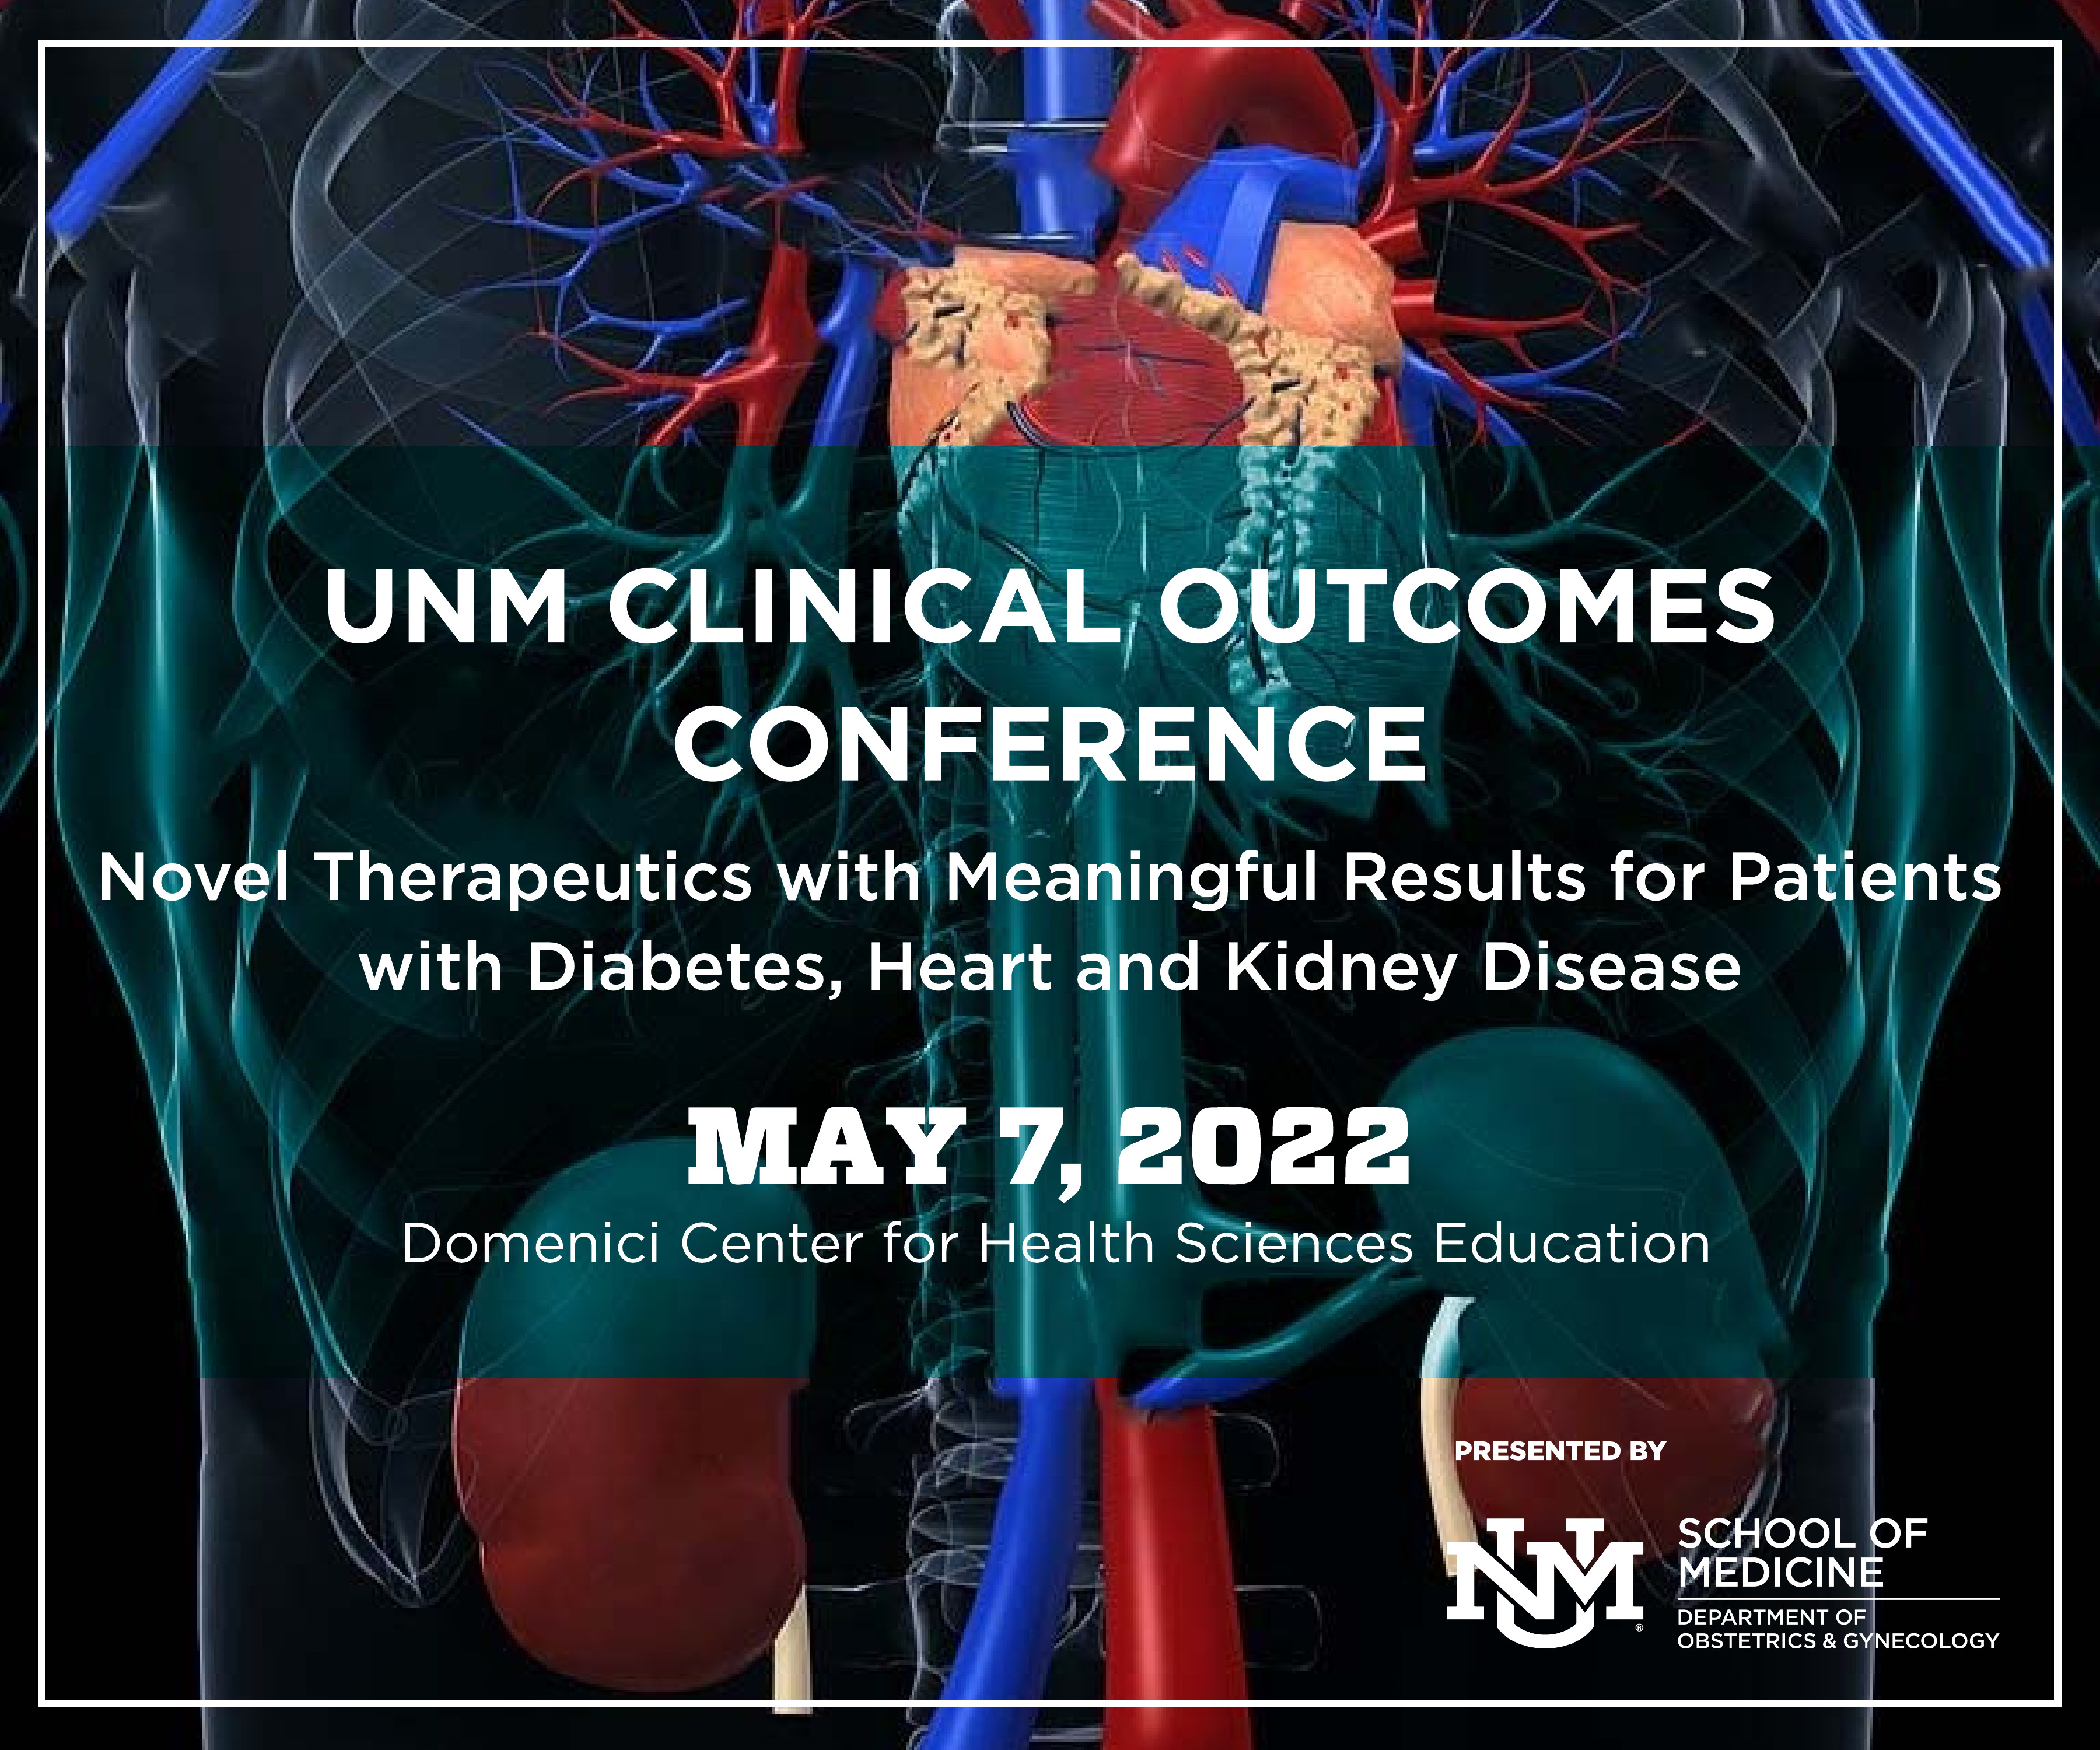 UNM Clinical Outcomes Conference image